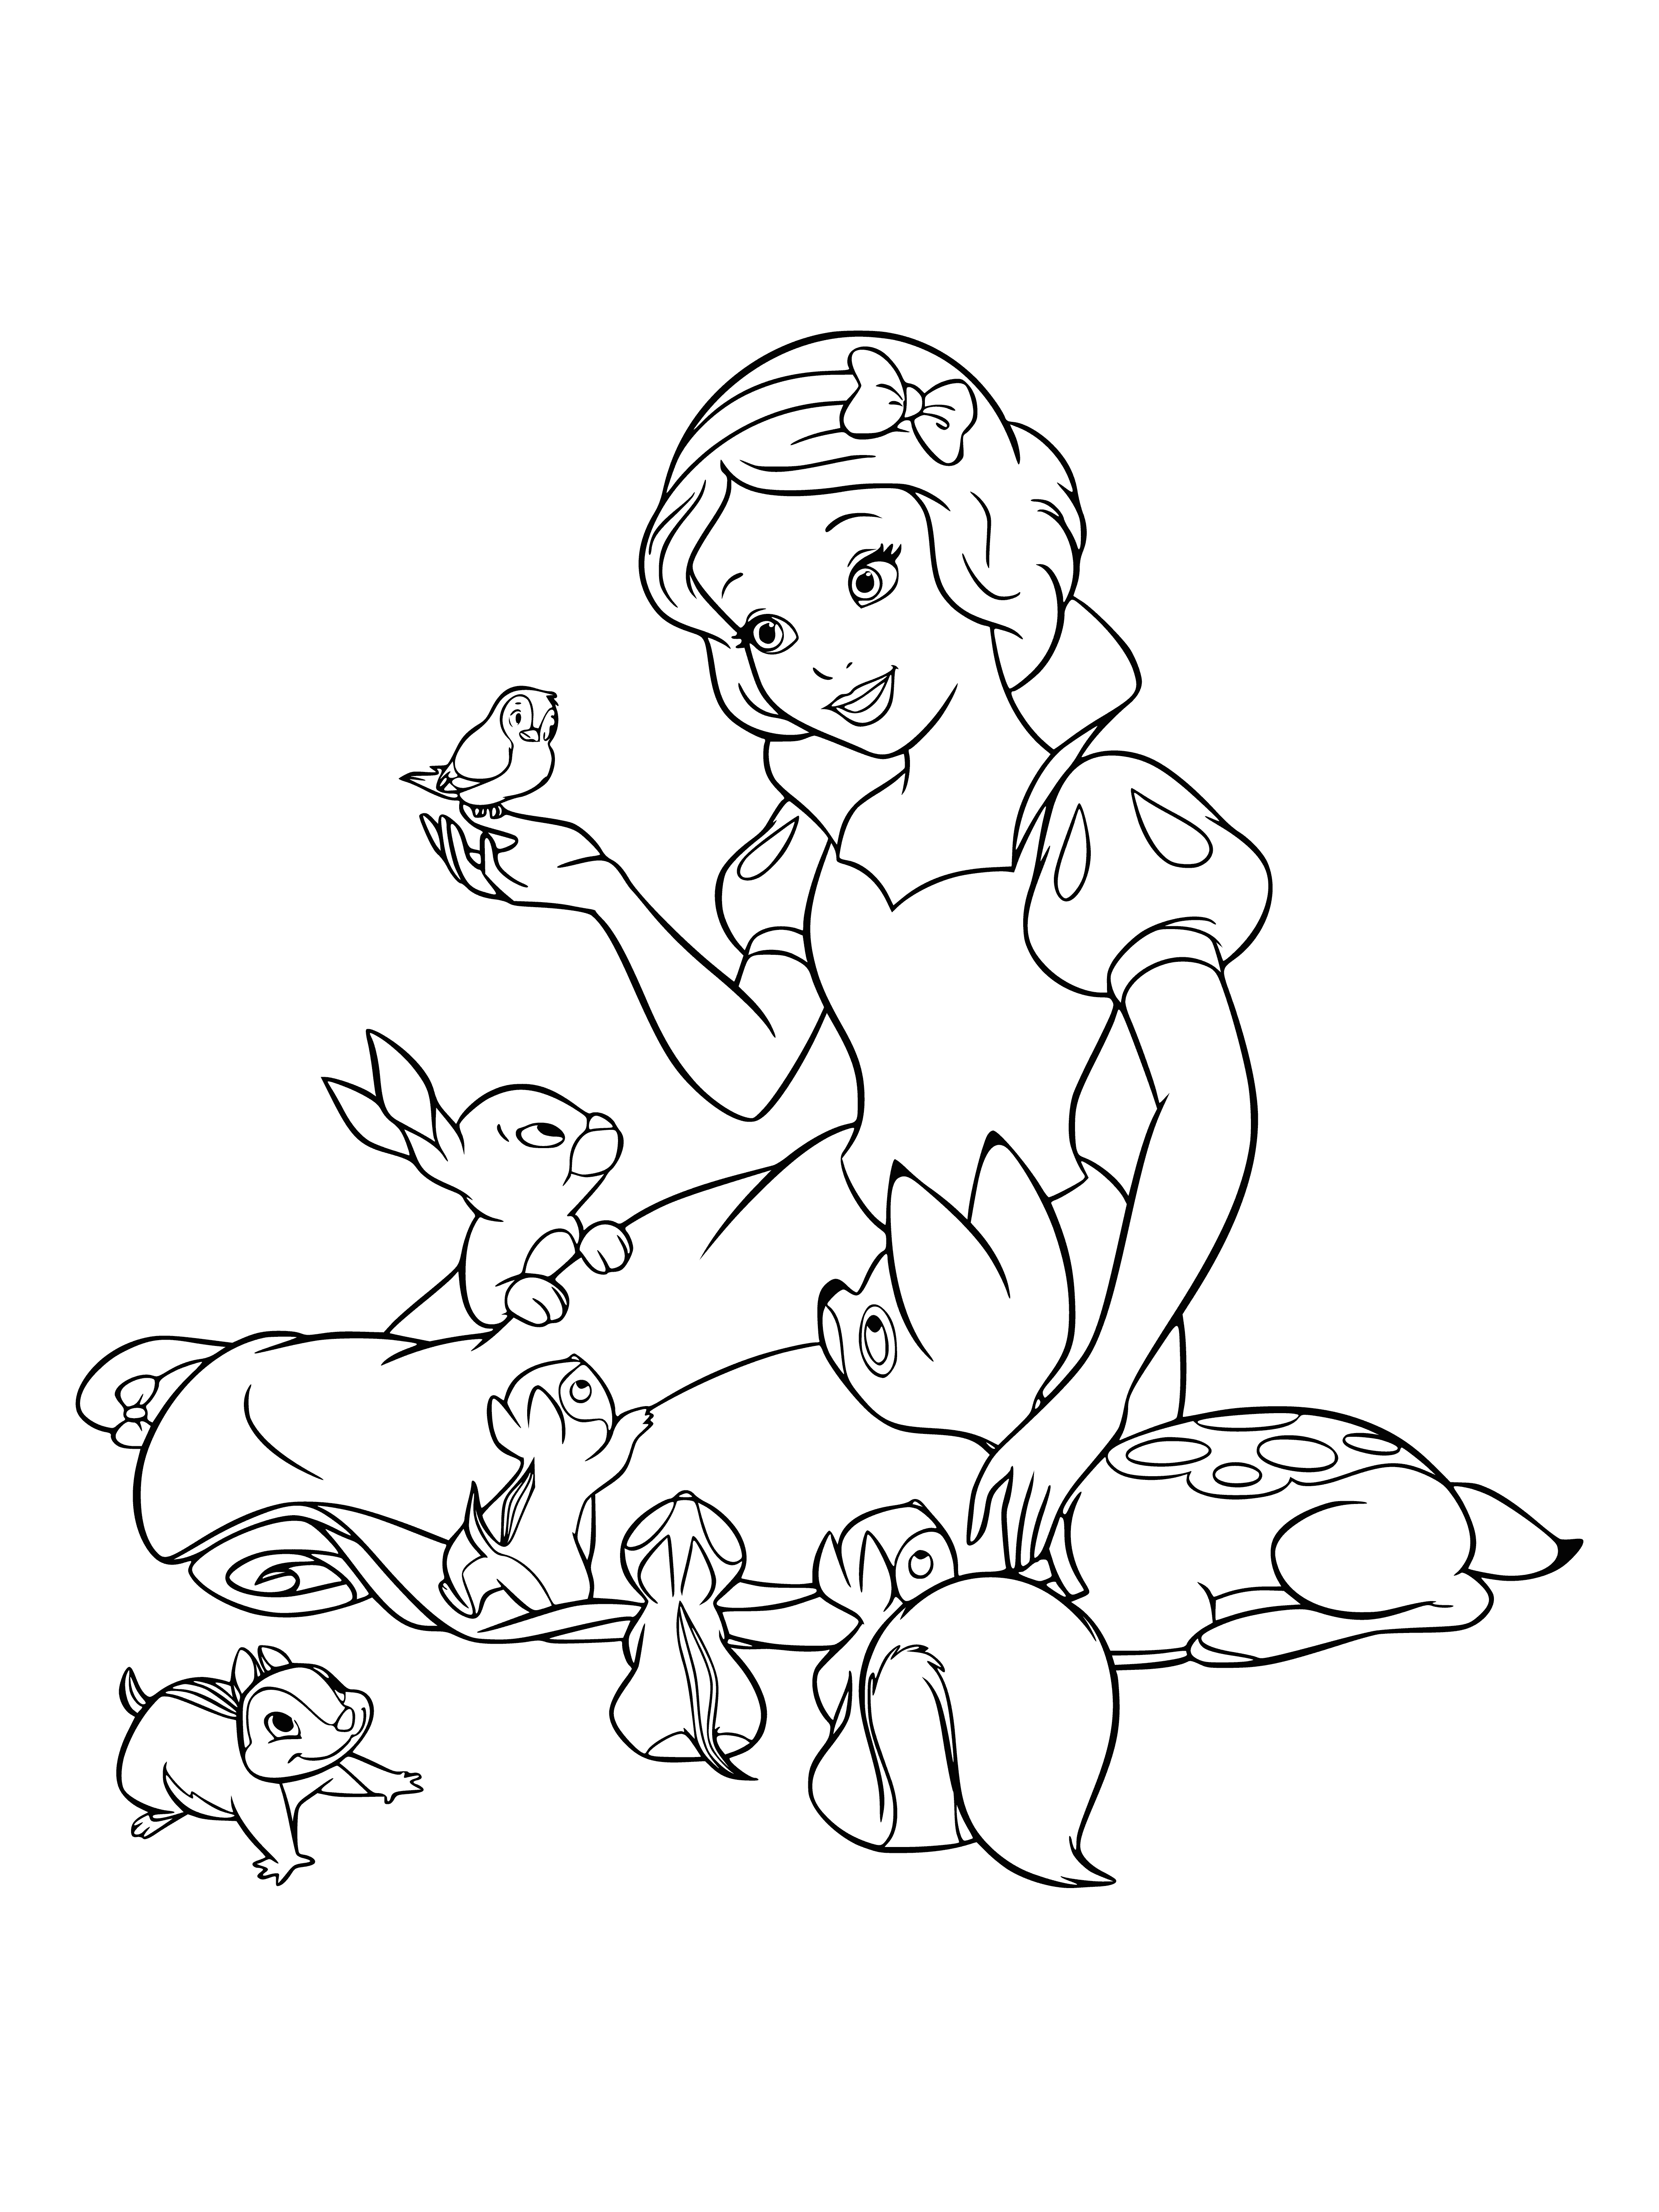 coloring page: Snow White is lovingly embraced by a baby deer, with a rabbit, squirrel and a variety of other animals observing her in a forest clearing.